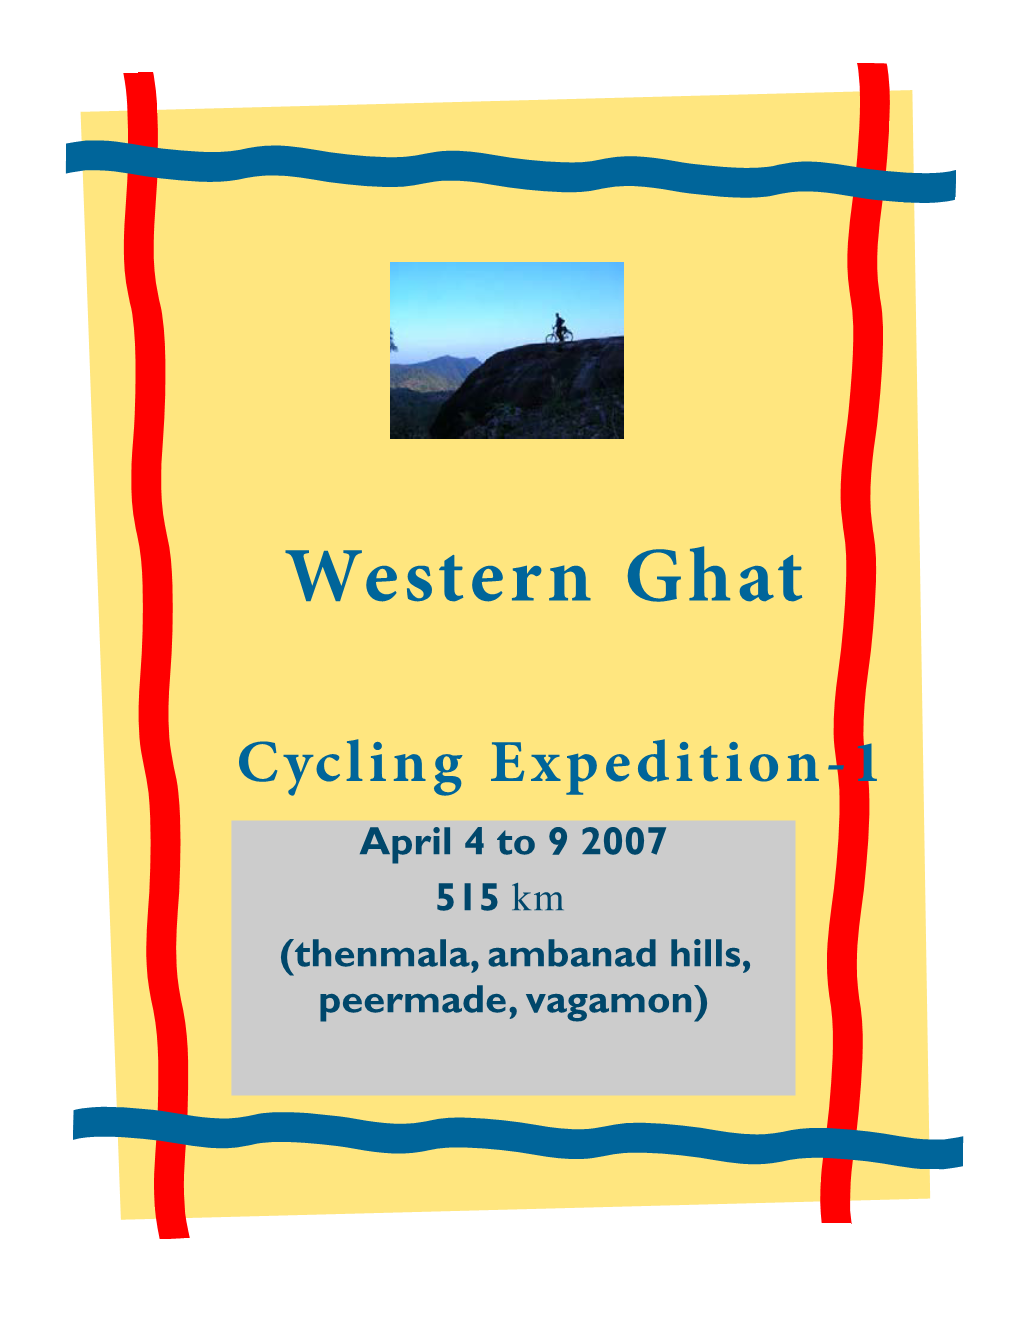 Western Ghat Cycling Expedition-1 April 4 to 9 2007 515 Km (Thenmala, Ambanad Hills, Peermade, Vagamon)